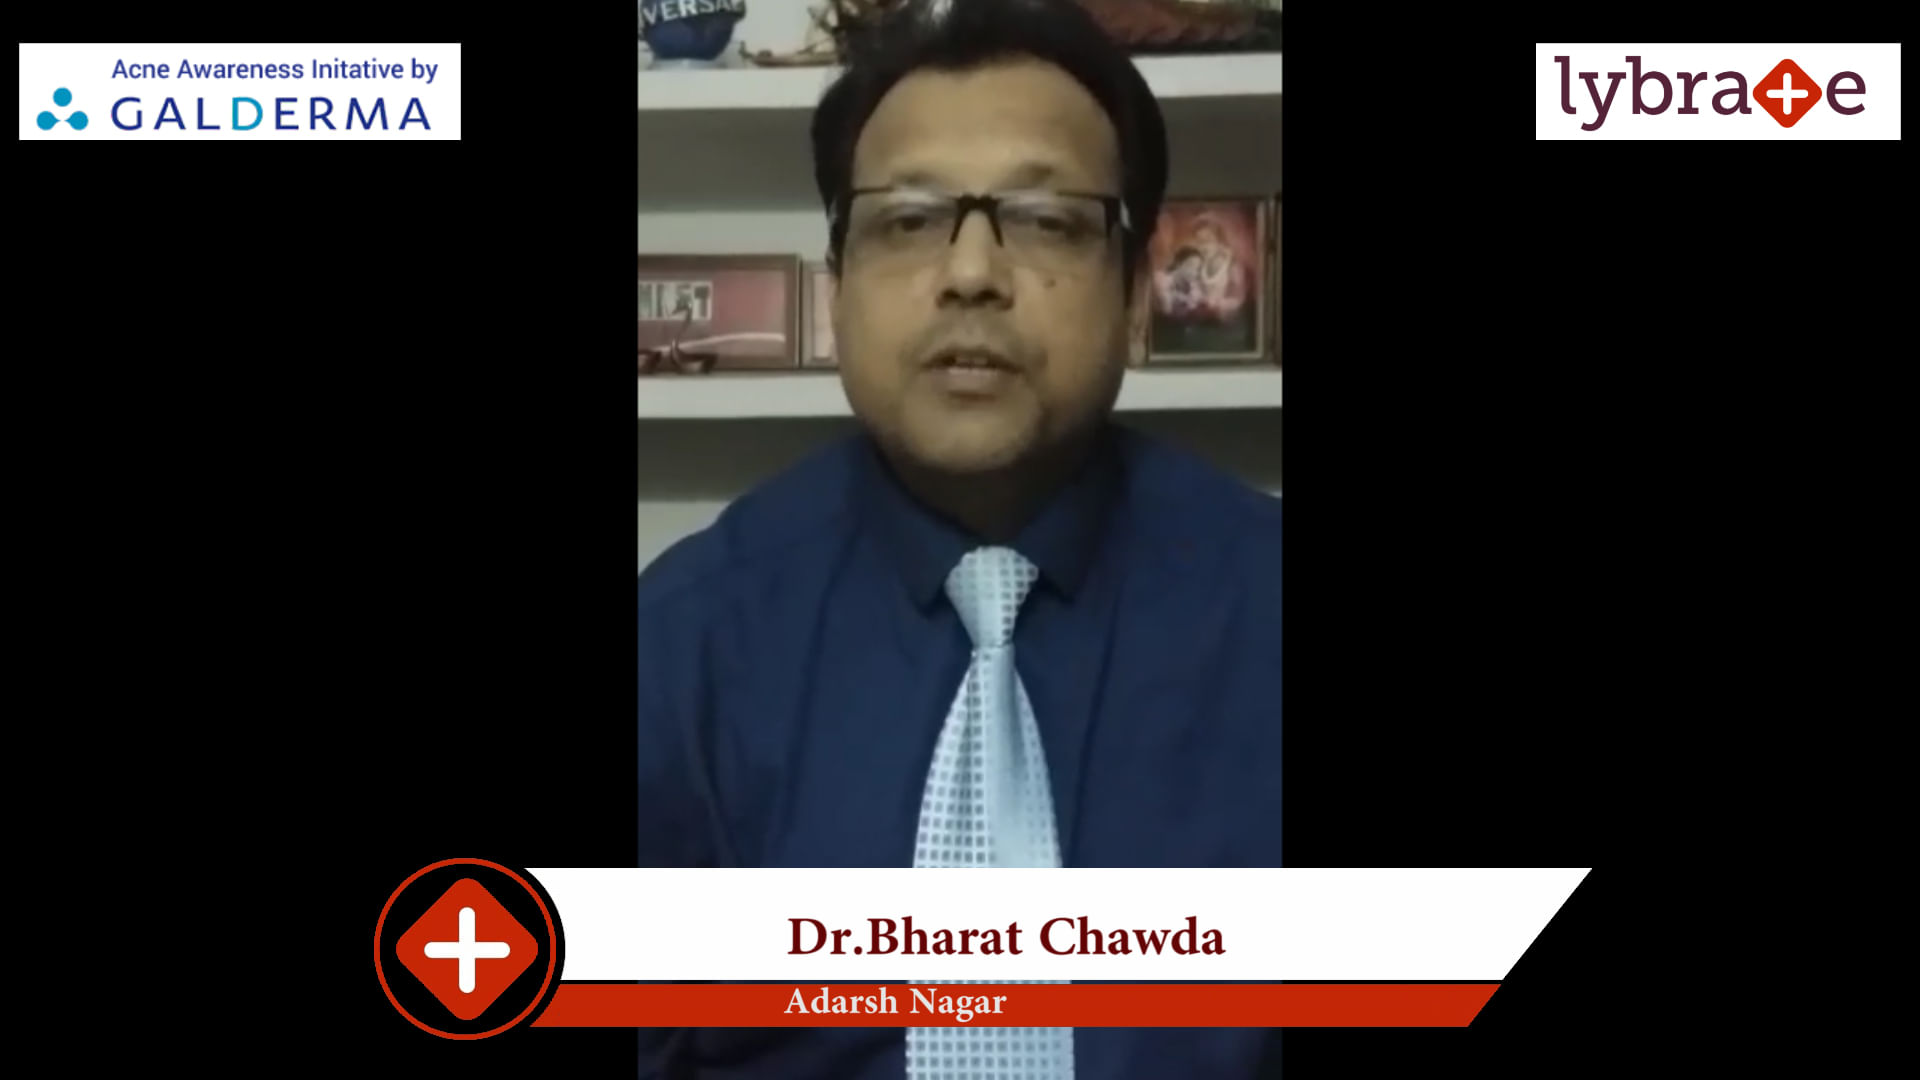 Lybrate | Dr. Bharat Chawda speaks on IMPORTANCE OF TREATING ACNE EARLY